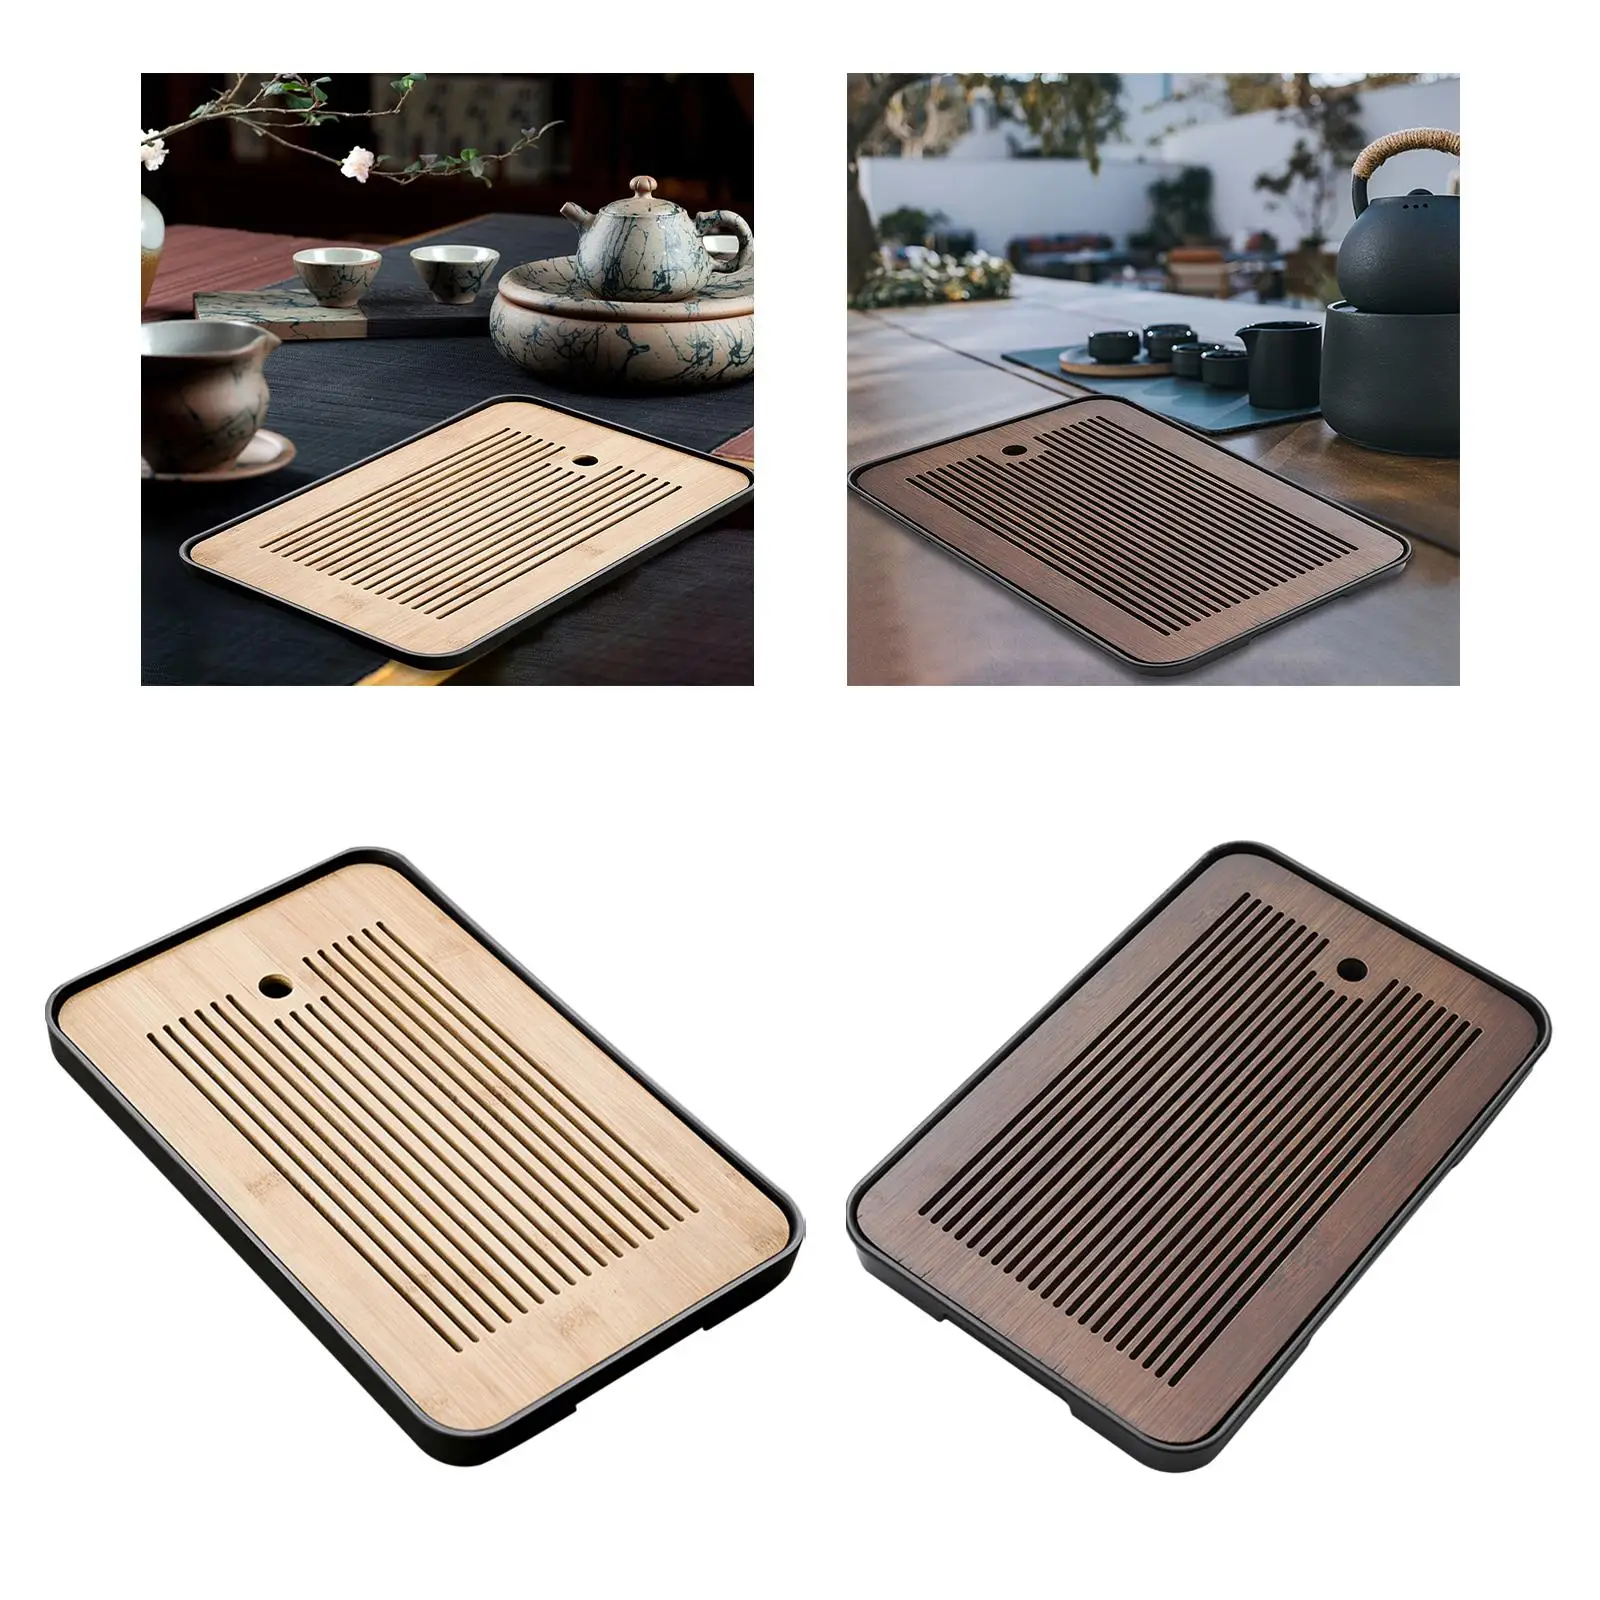 Bamboo Tea Drian Tray Simple Durable with Water Storage Box Kungfu Tea Table for Office Tea Lover Gift Household Home Teahouse